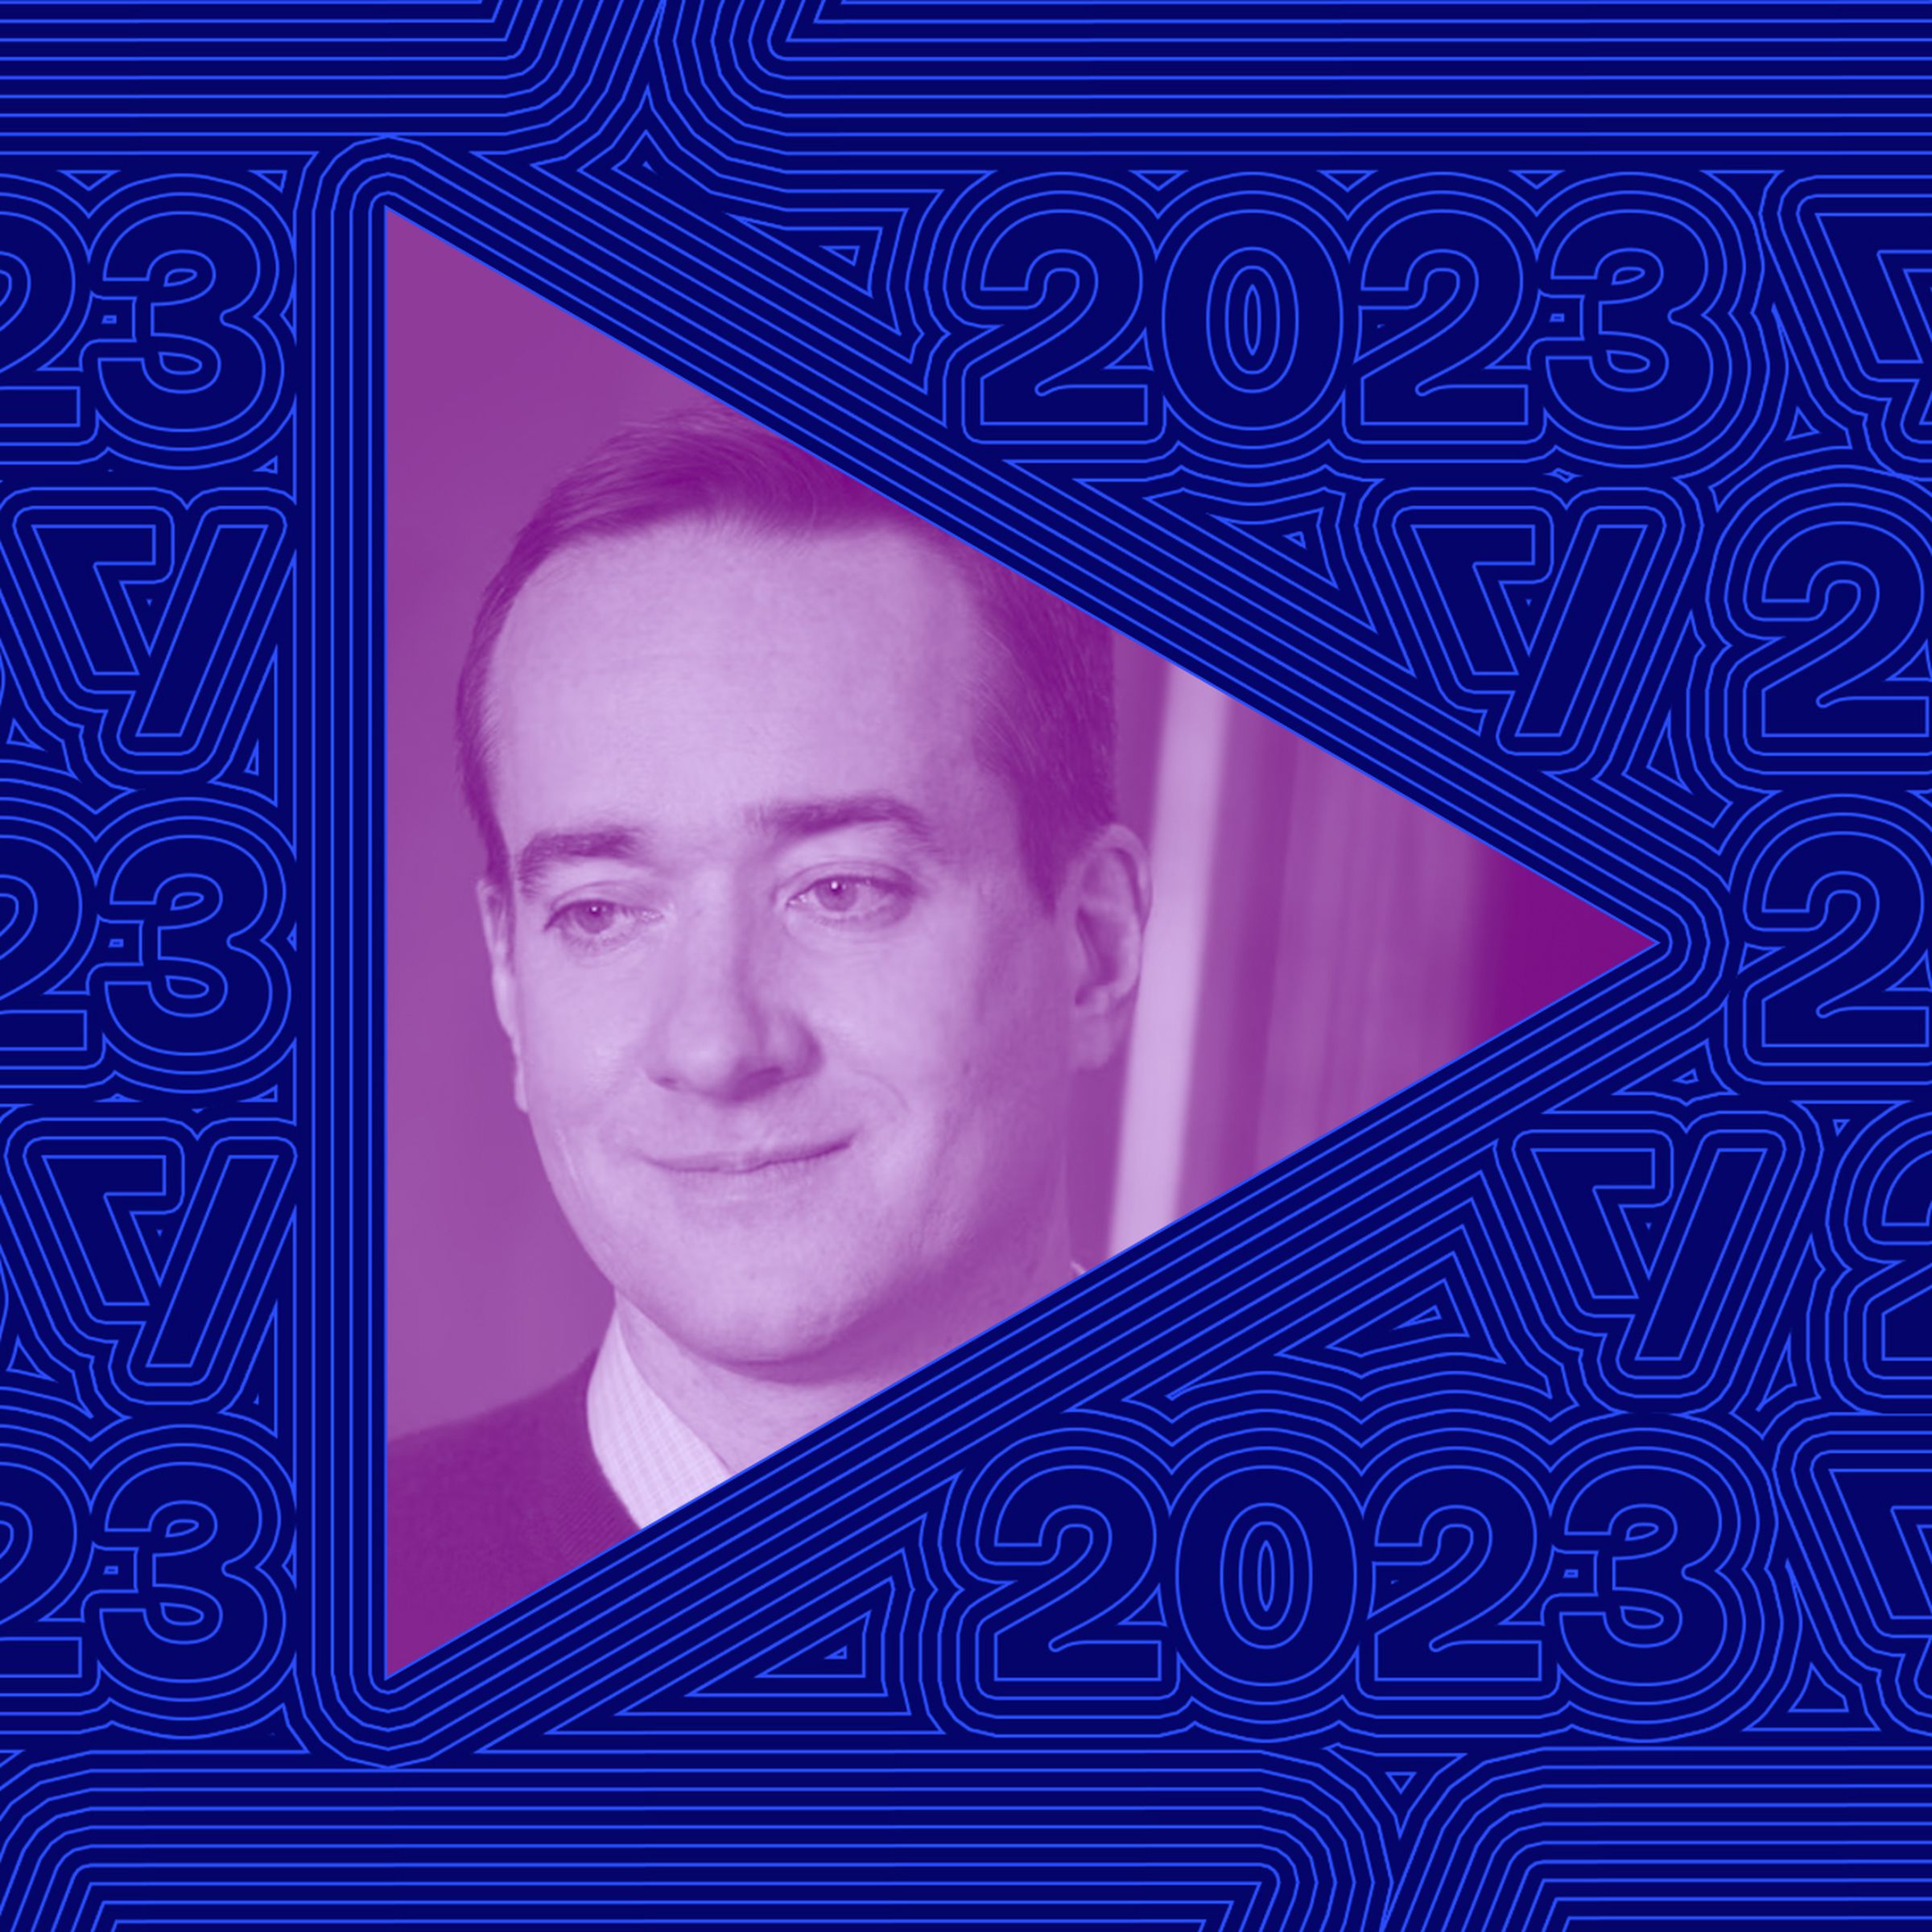 Vector collage showing a still from Succession of Matthew Macfadyen in a play button symbol.